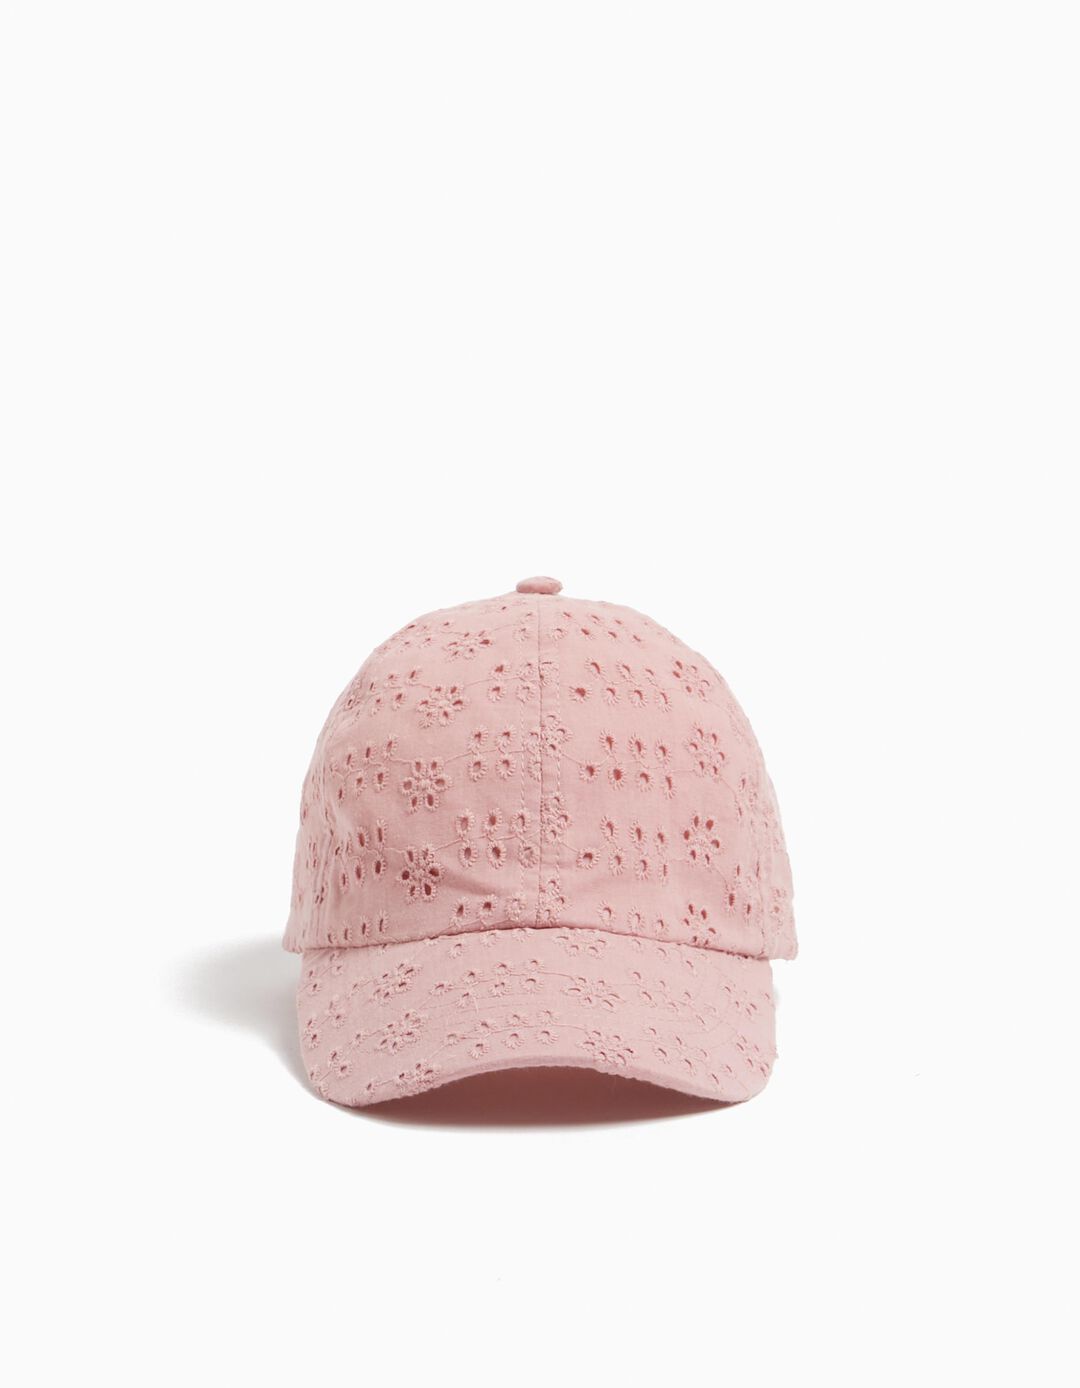 English Embroidered Cap, Girl, Light Pink